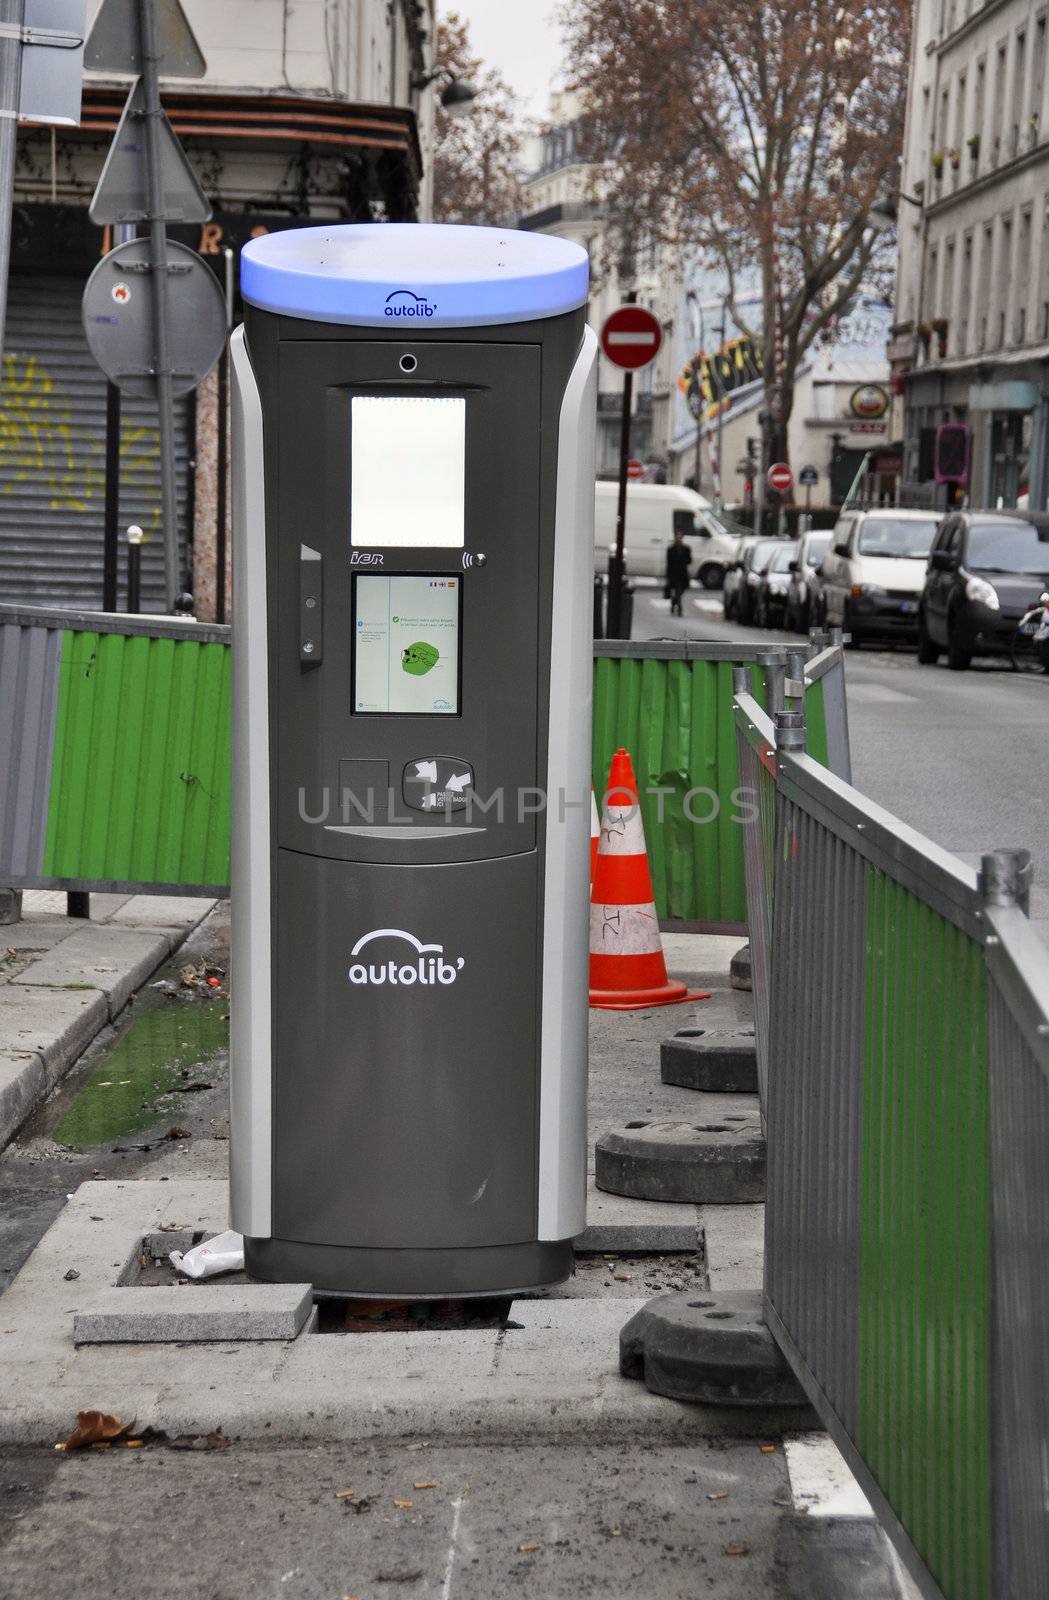 An Autolib' station almost ready in Paris, France